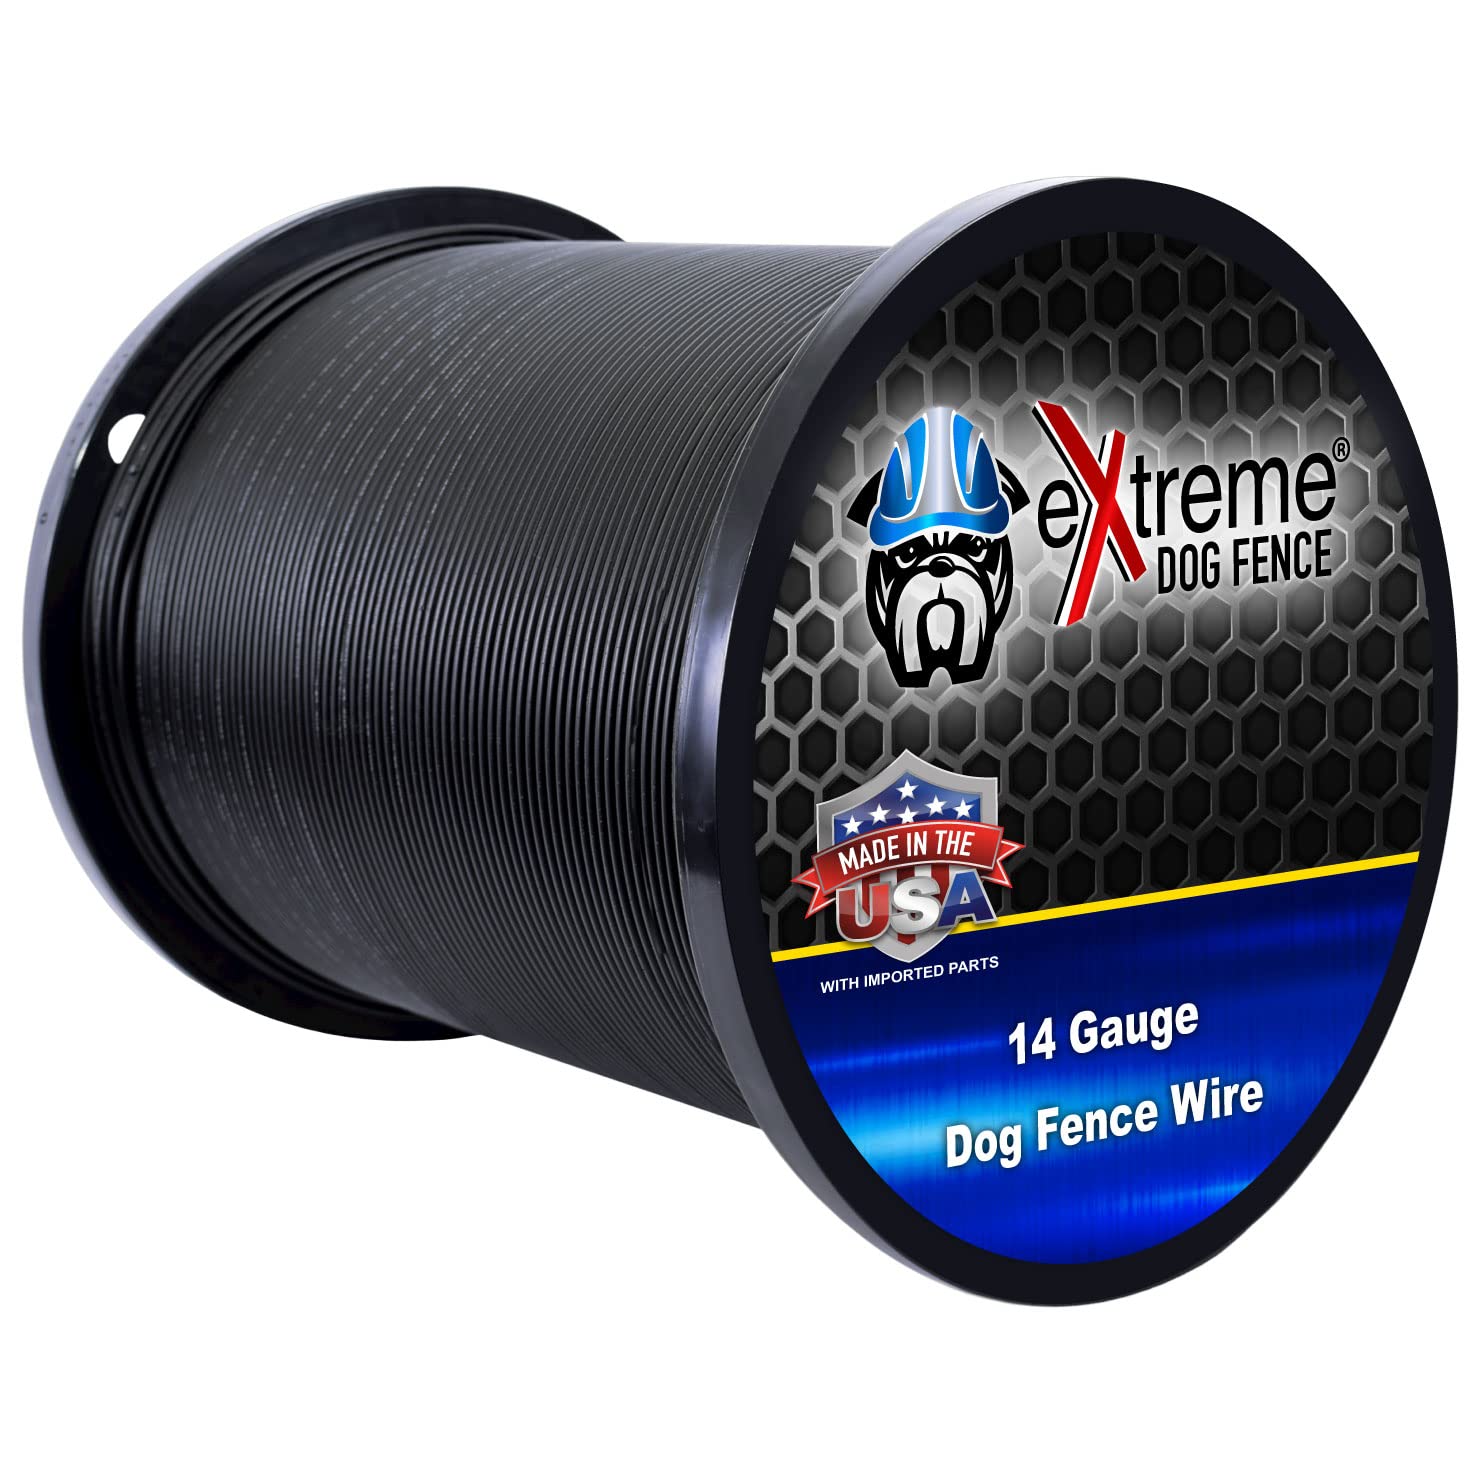 Electric Dog Fence Wire 14 Gauge 1000 Ft - Heavy Duty Core Electric Dog Fence Boundary Wire - Compatible with All In-Ground Pet Fence Systems